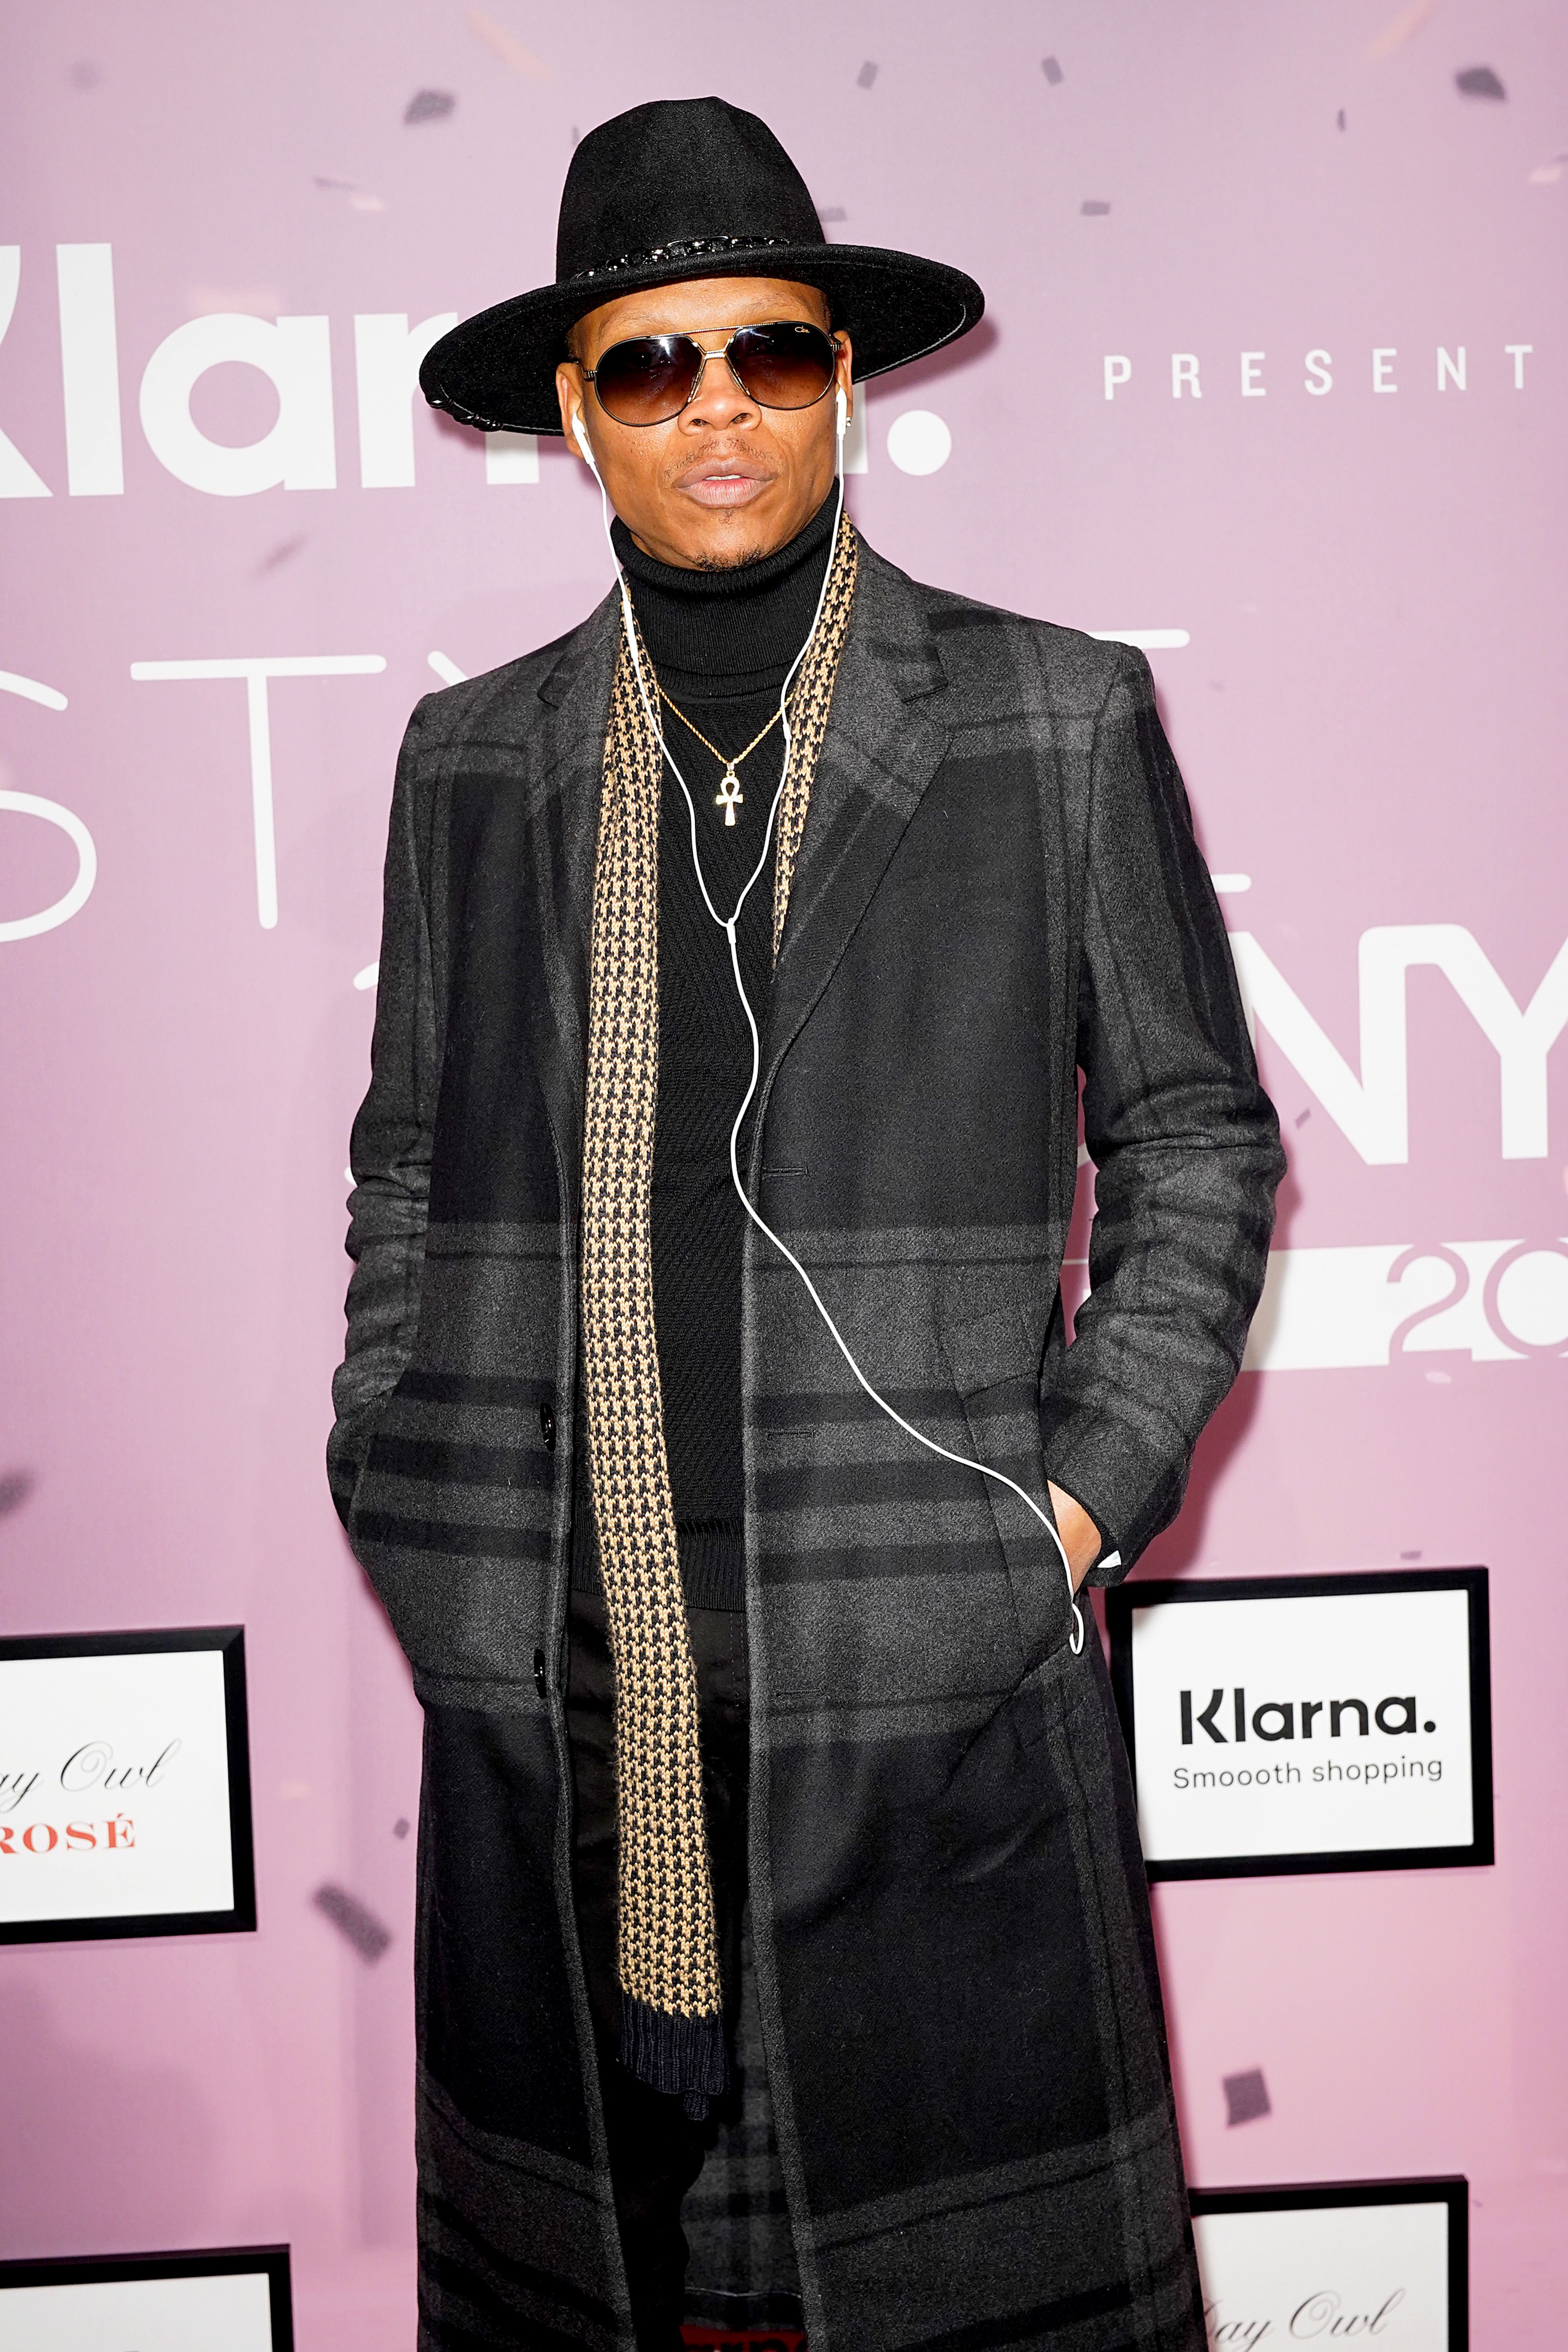 Ronnie DeVoe at "Klarna STYLE360 Hosts Andy Hilfiger" on February 12, 2020 | Photo: Getty Images